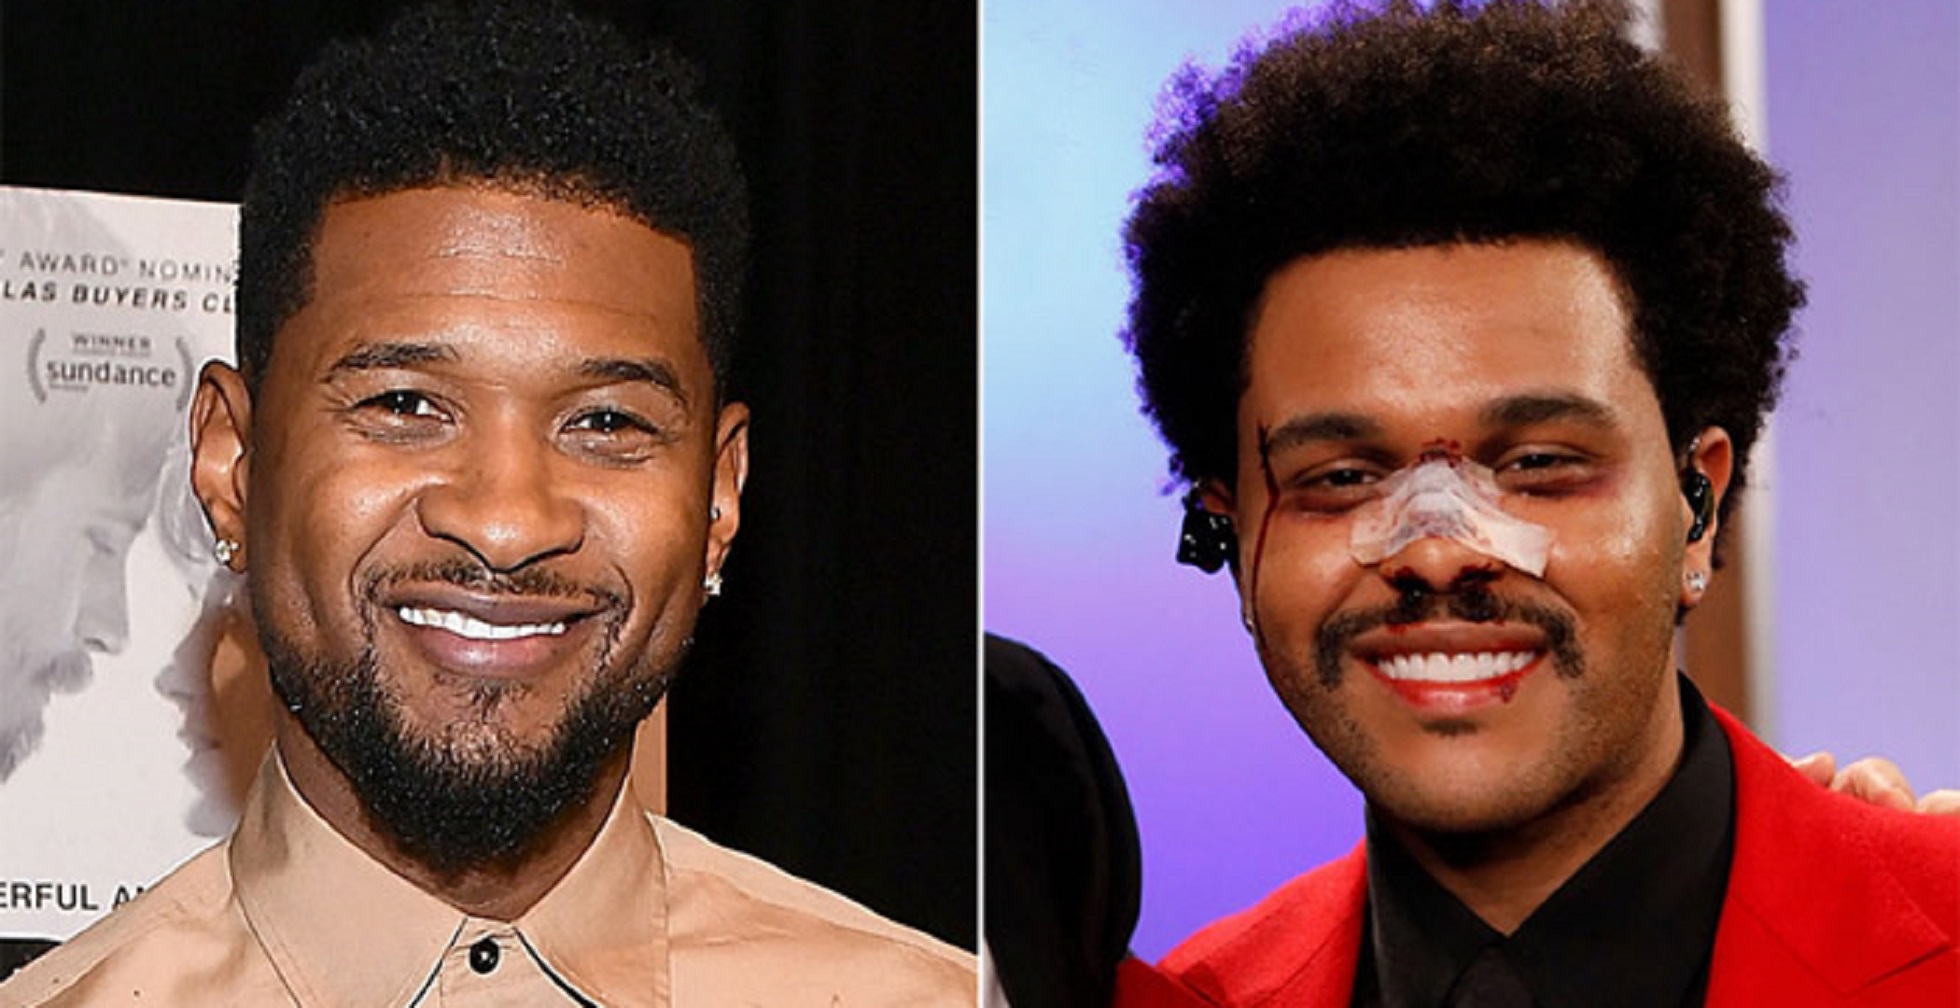 Are You Team Usher or Team The Weeknd? Vote Here!